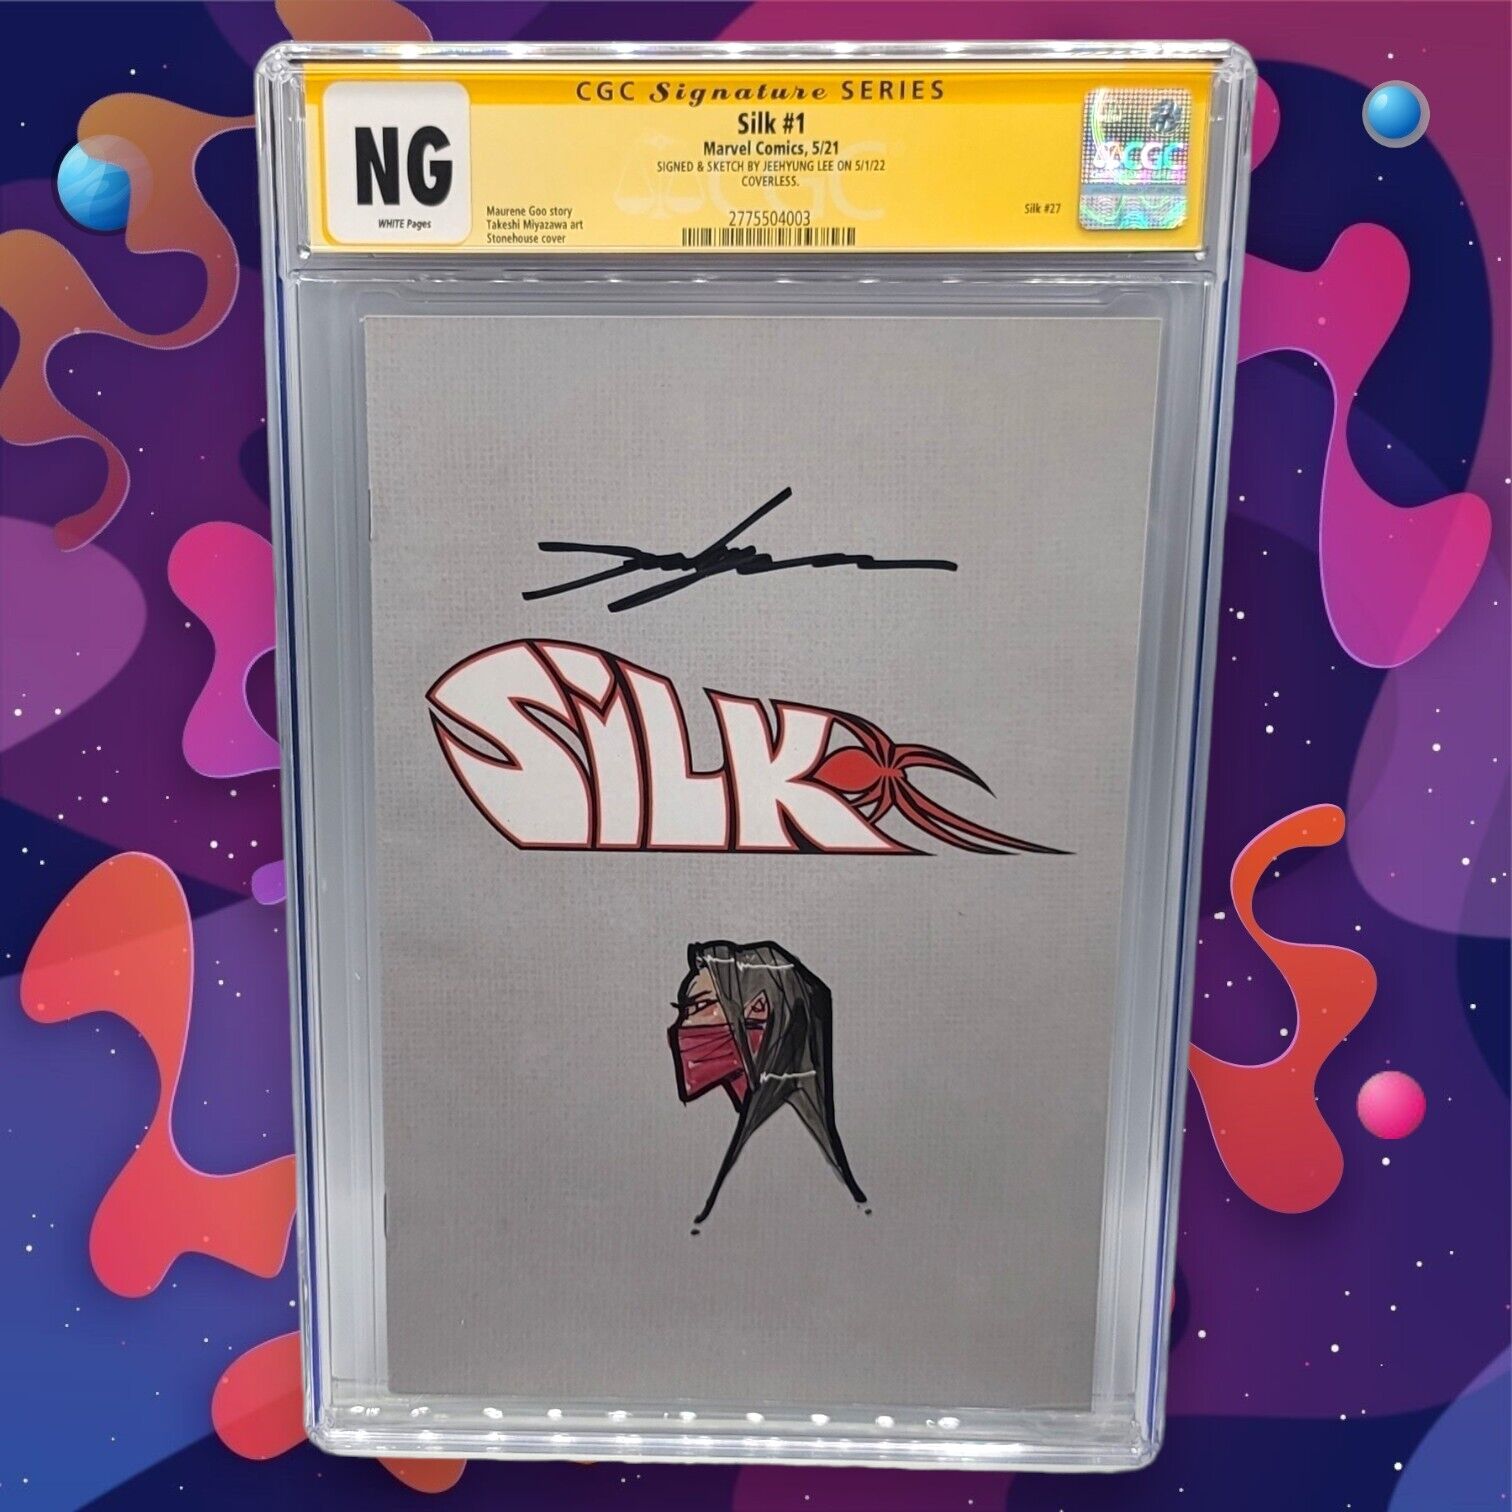 Silk #1  CGC SS NG Rare Error Variant 1A SIGNED & Remarked By JEEHYUNG LEE 